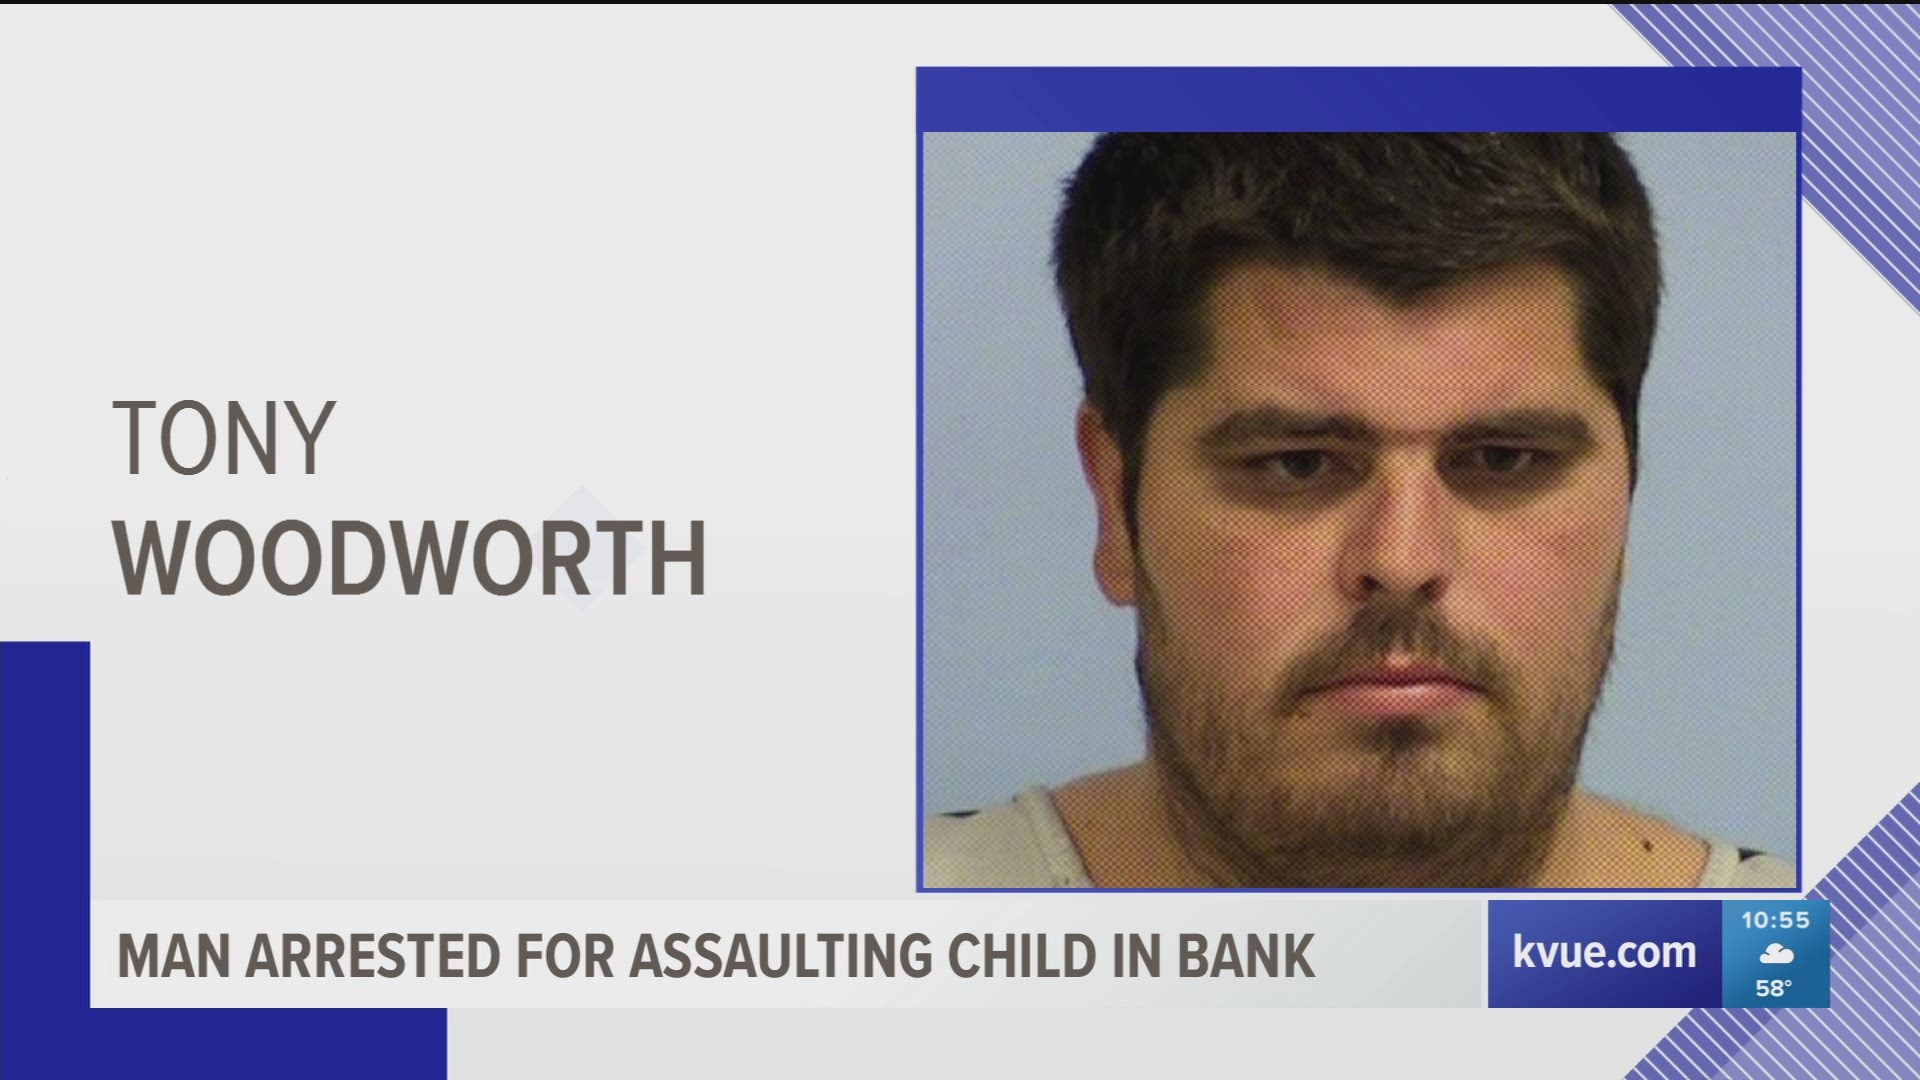 Tony Woodworth is accused of targeting a nine-year-old boy at an Austin bank in mid-August.